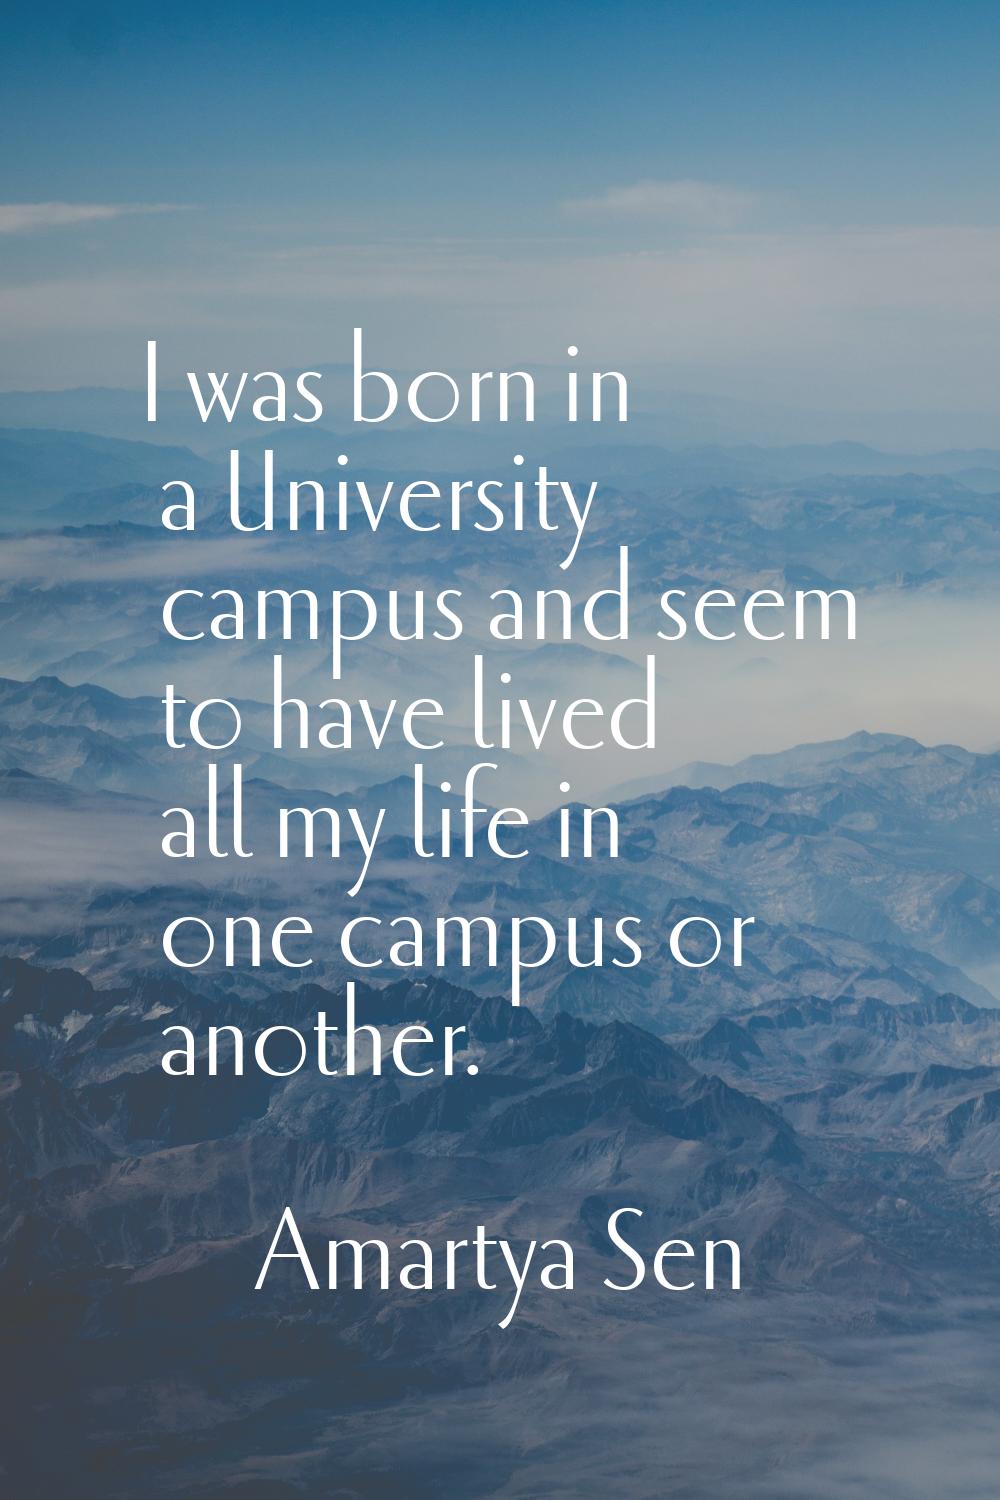 I was born in a University campus and seem to have lived all my life in one campus or another.